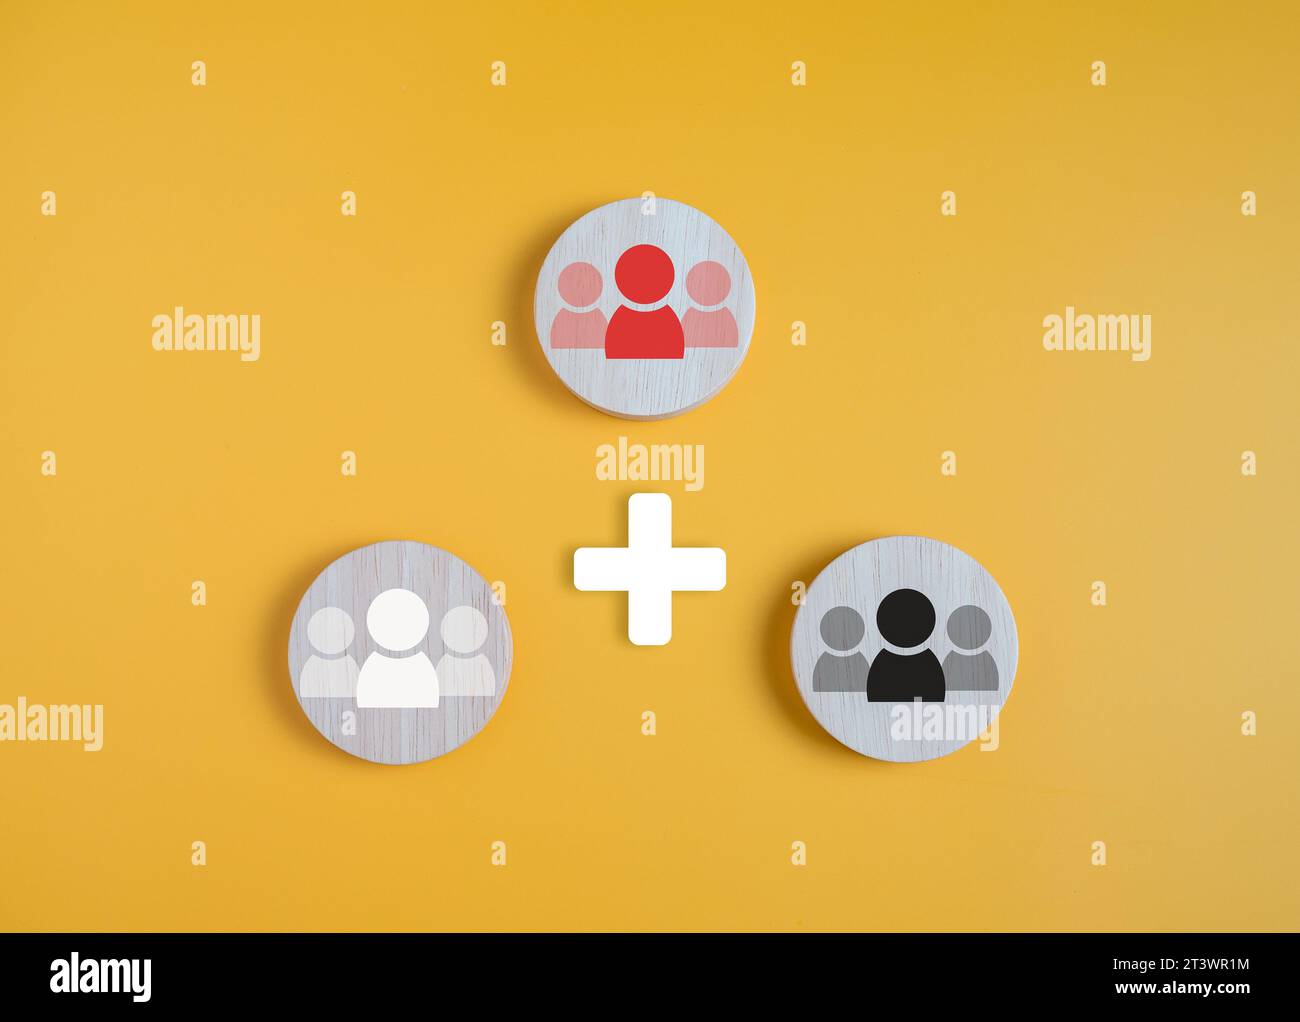 Circle board with employee icons on a yellow background shows the concept of human resource management and teamwork and coordination. Stock Photo